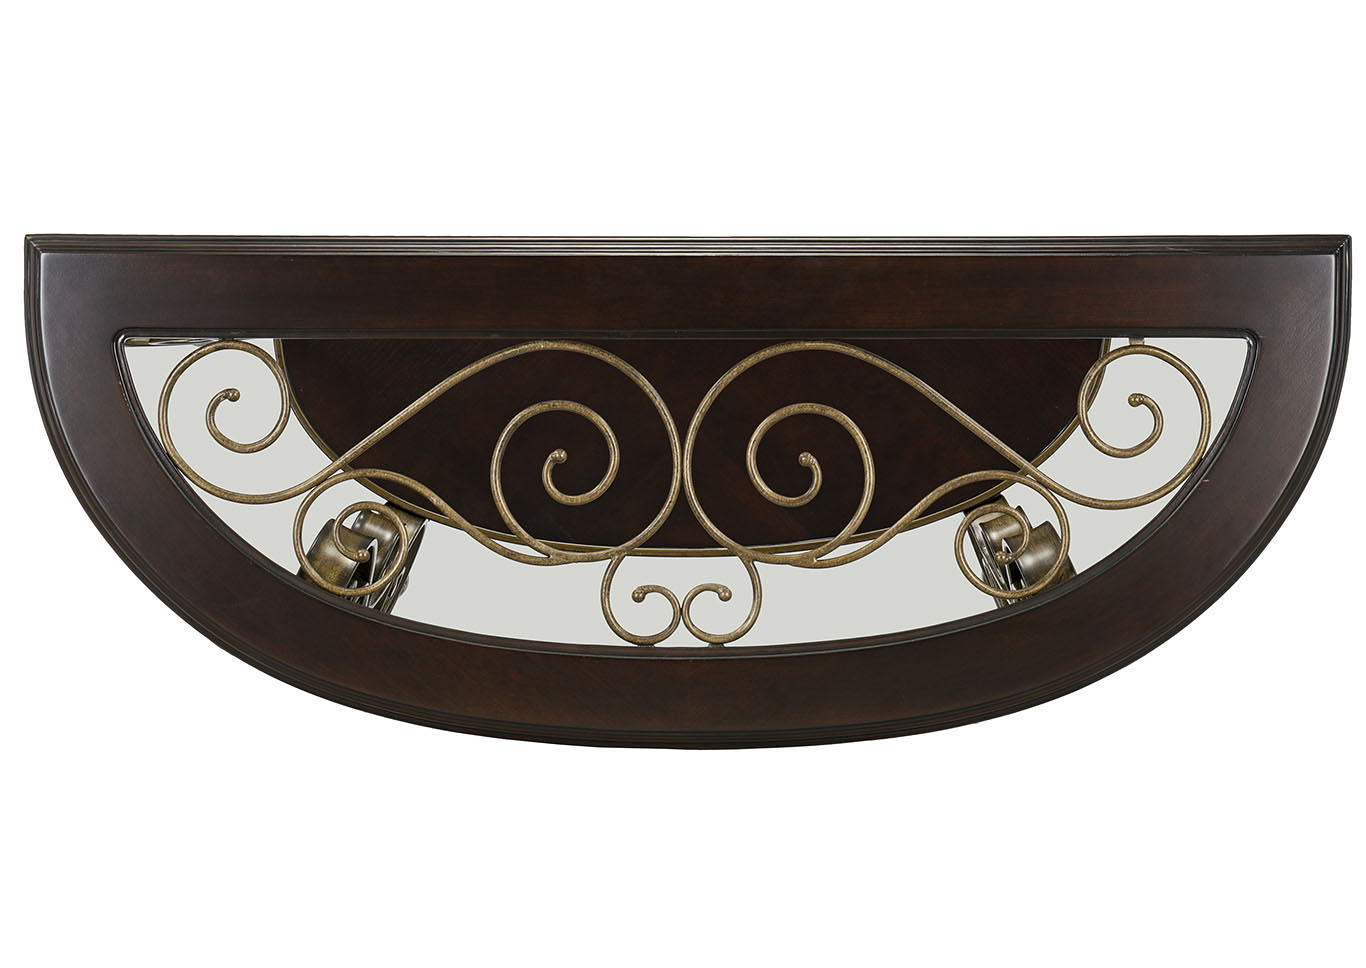 Bombay Console Table,Standard